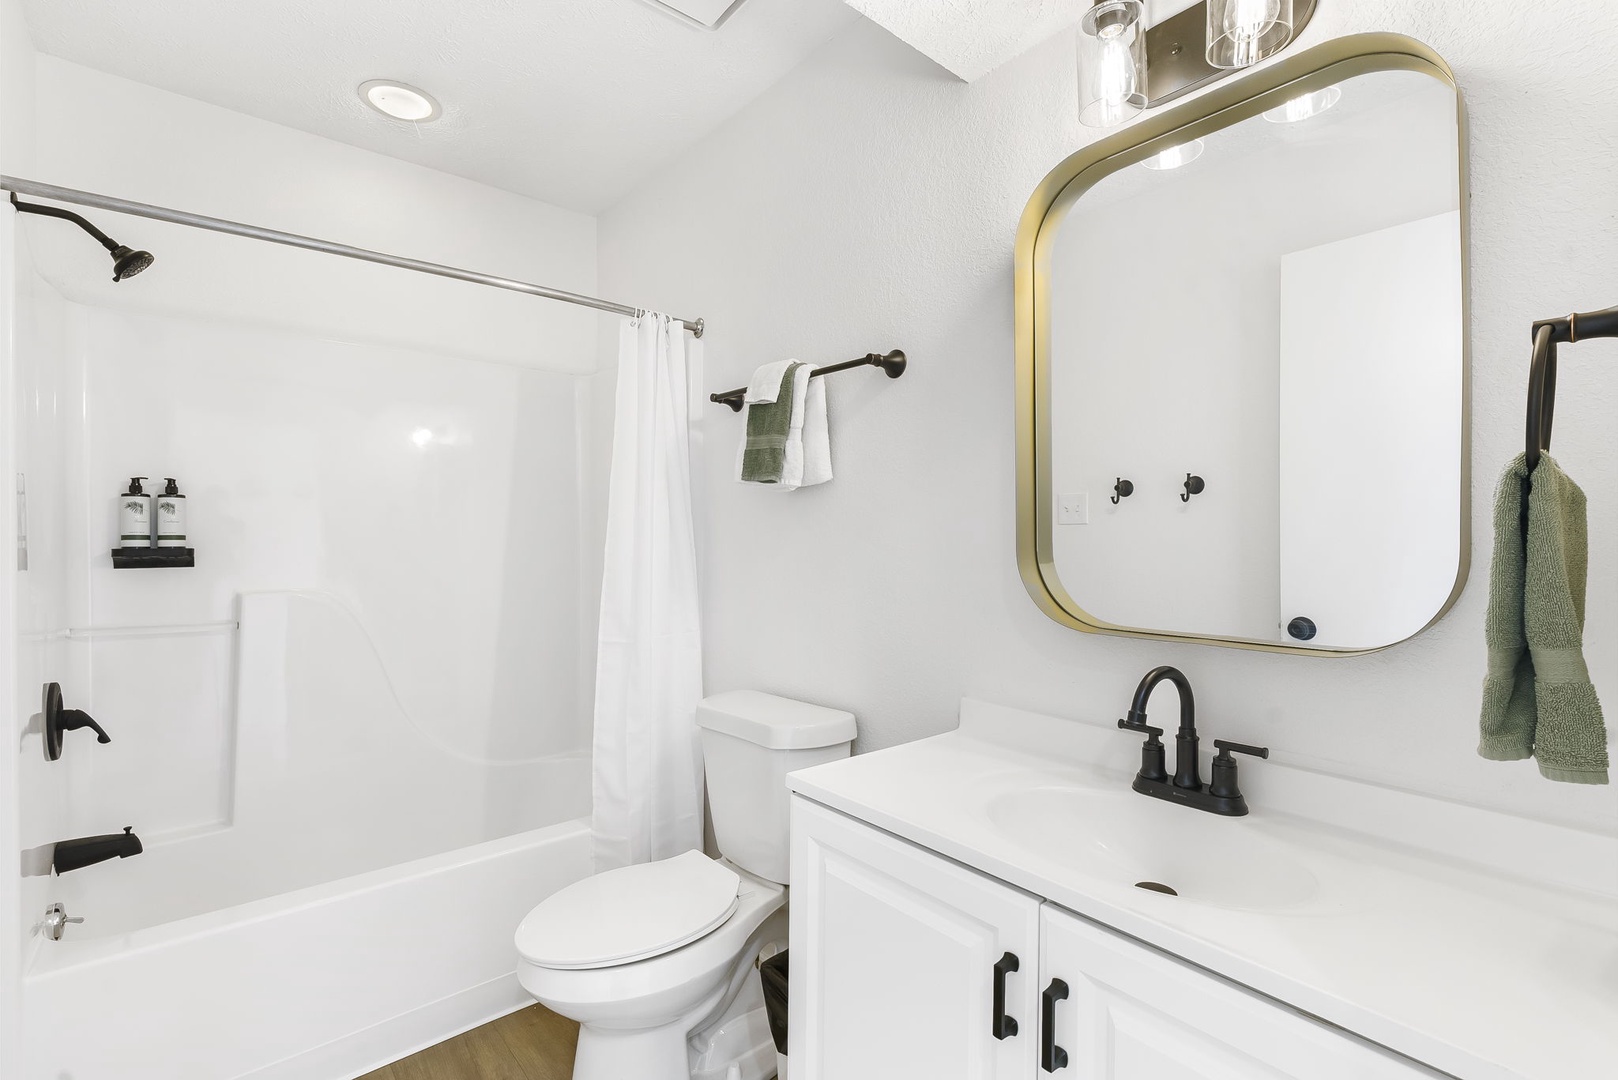 The 2nd floor hall bath offers a single vanity & shower/tub combo